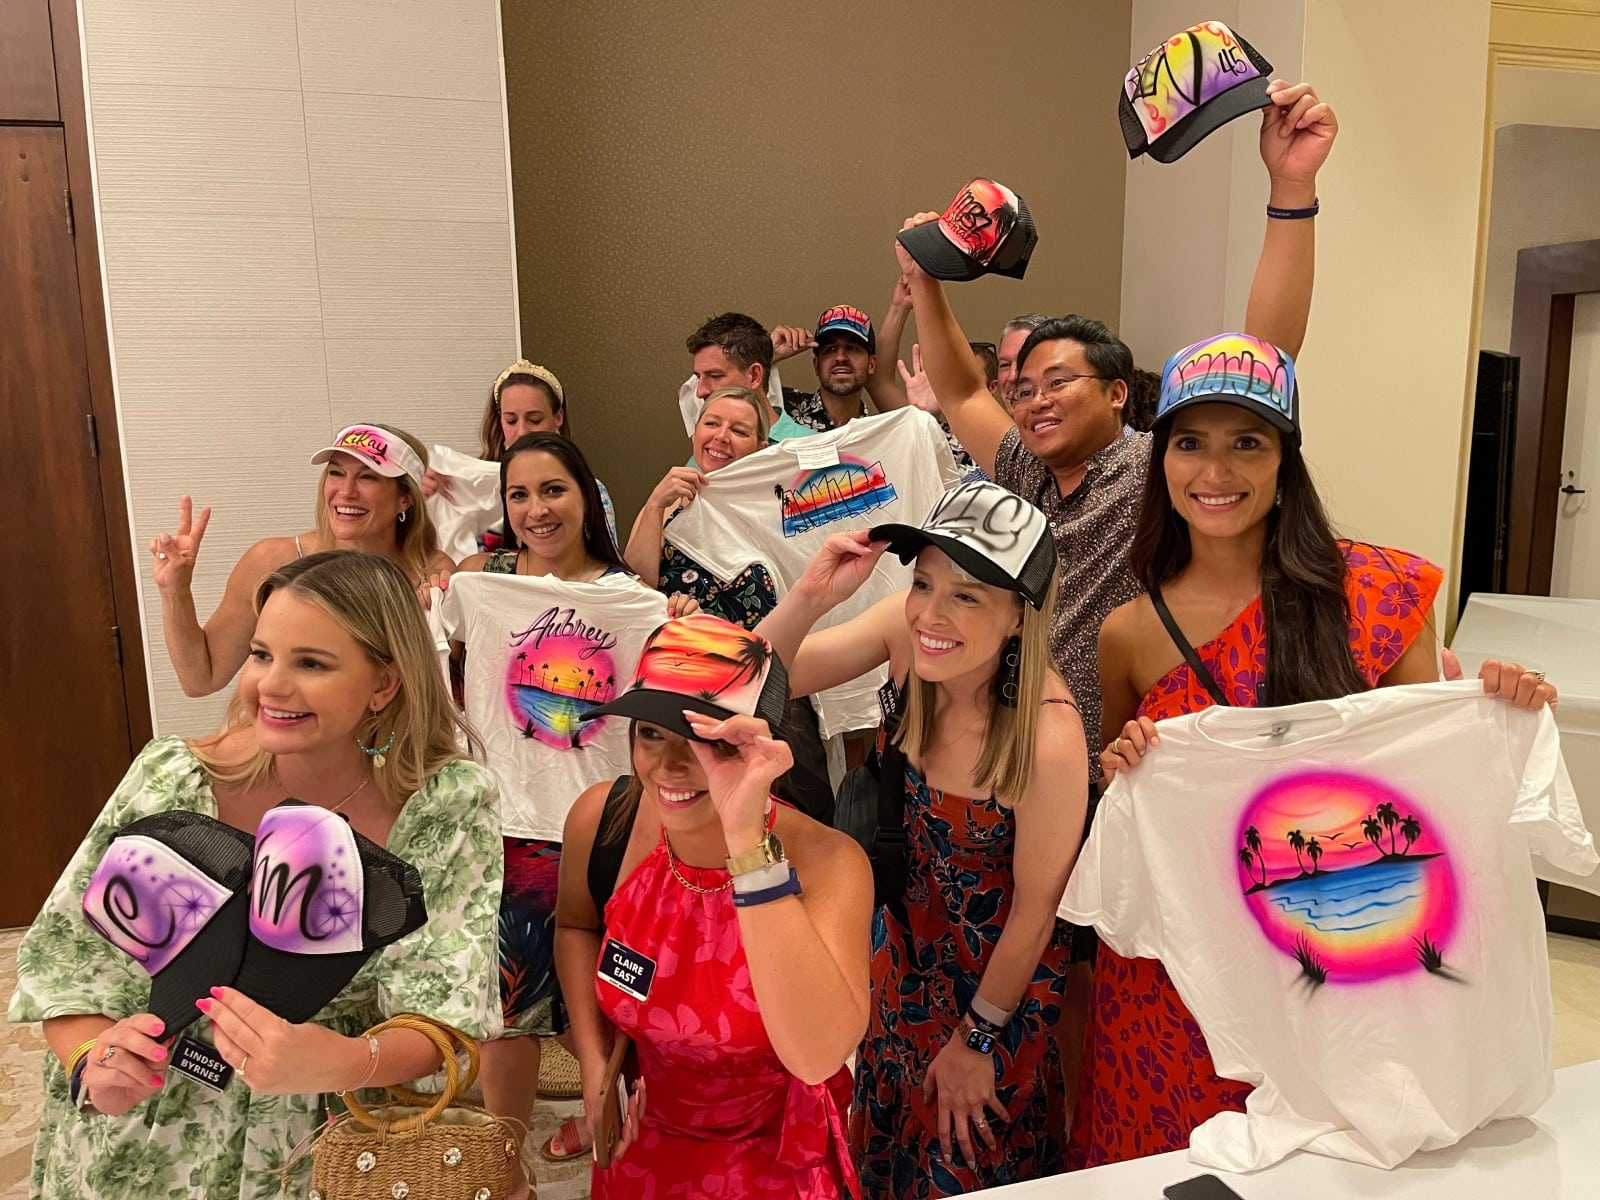 A group of event guests smile for the camera while showing off their airbrushed t-shirts and hats - corporate event planning